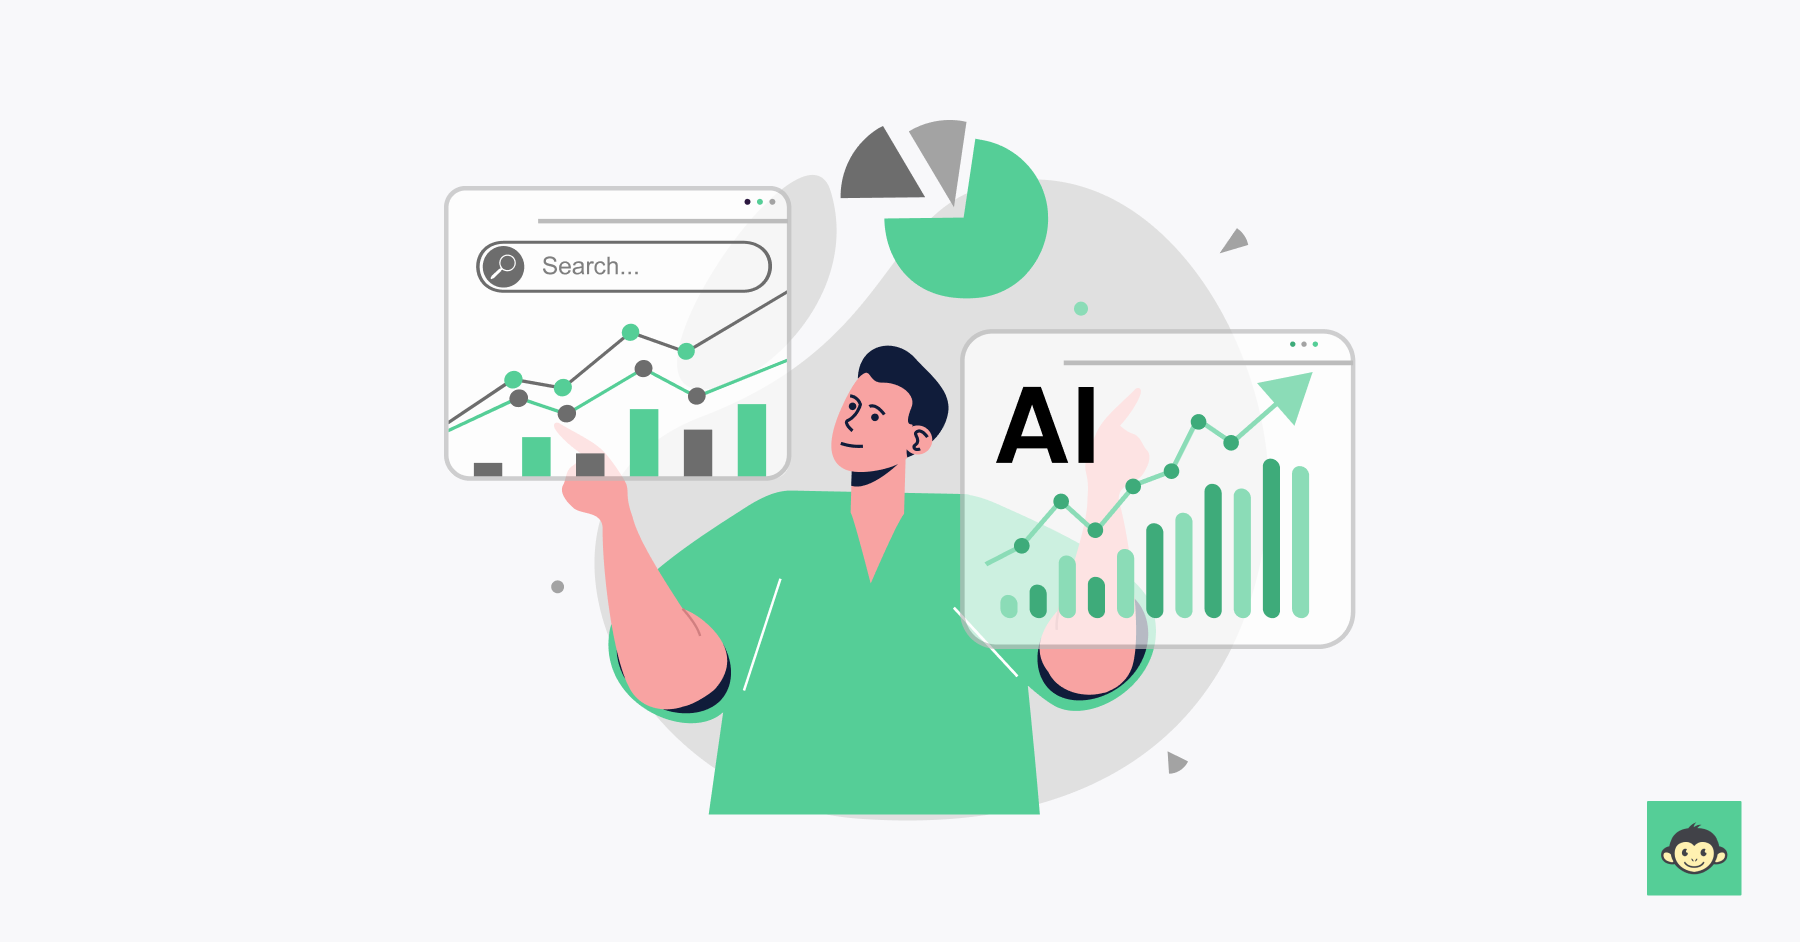 Role of AI in analyzing trends and patterns in employee engagement metrics